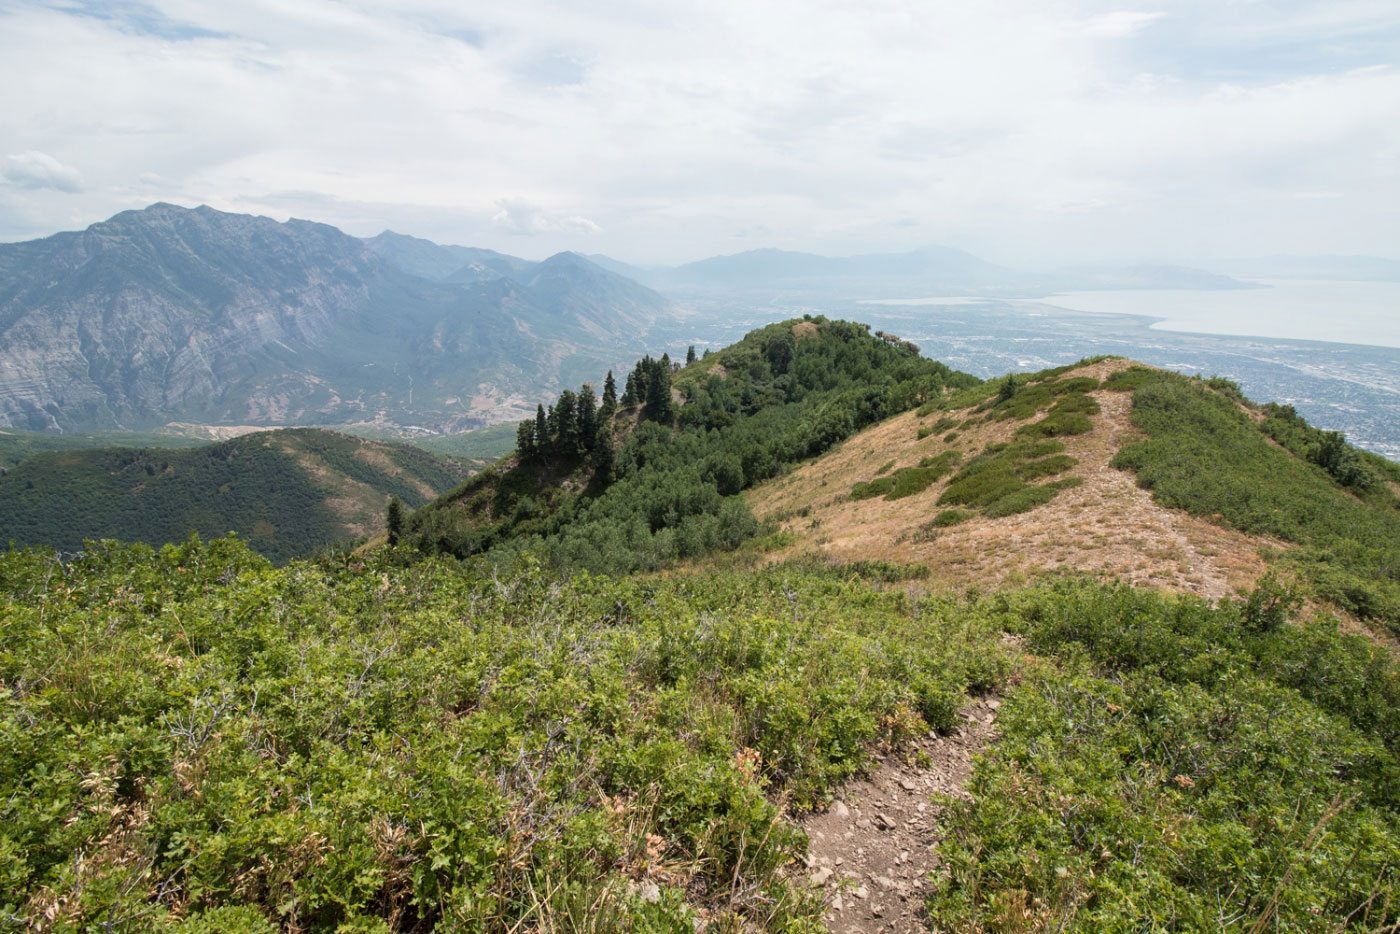 Hike Big Baldy Peak via Dry Canyon in Wasatch-Cache National Forest, Utah - Stav is Lost